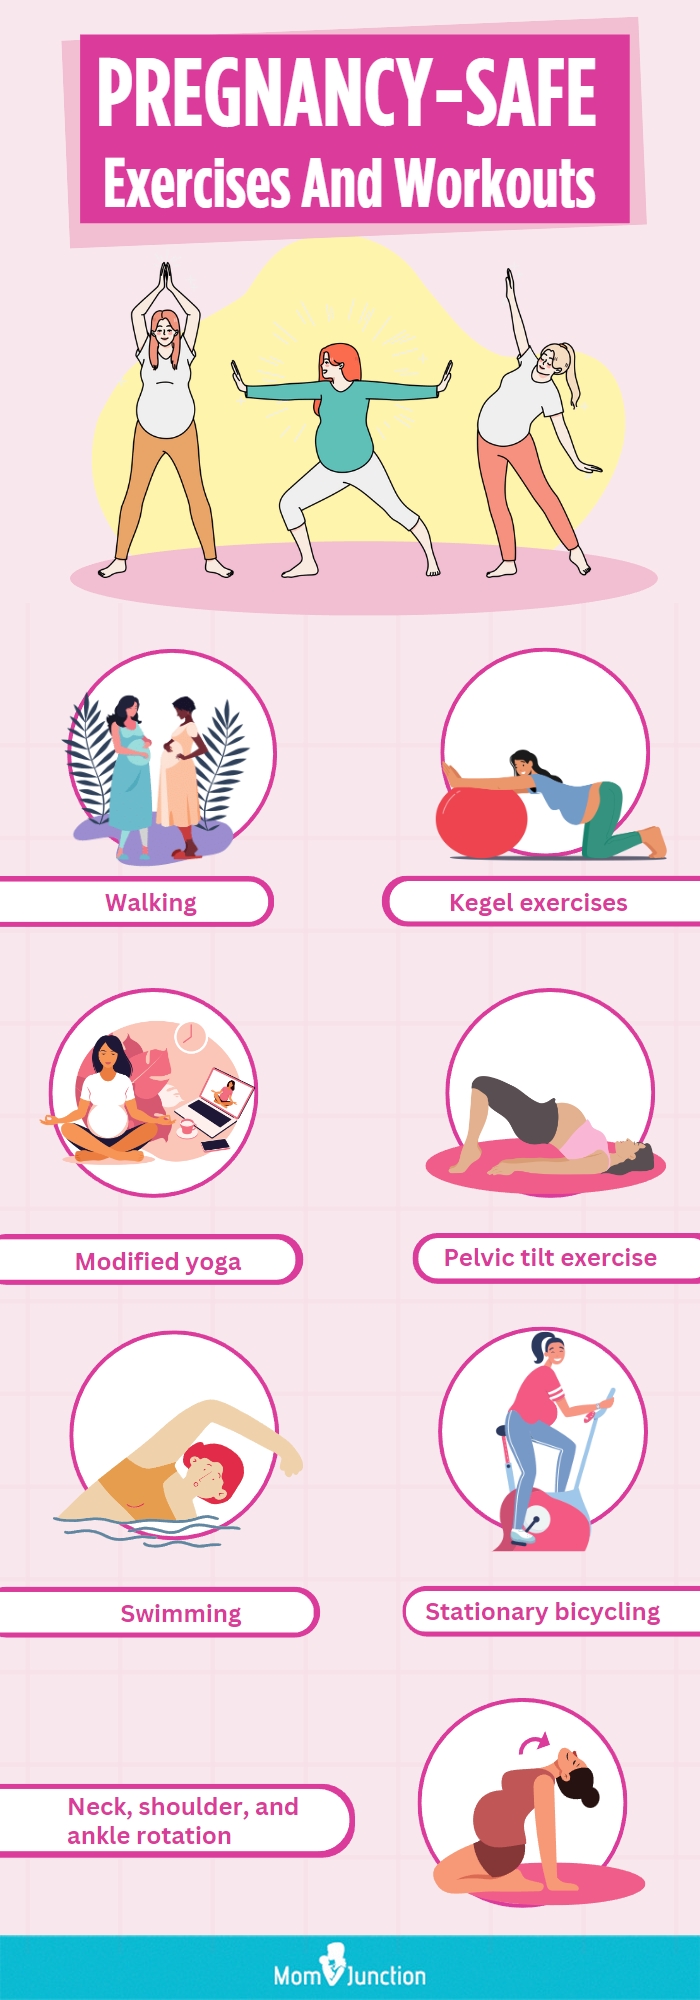 pregnancy safe exercises and workouts (infographic)